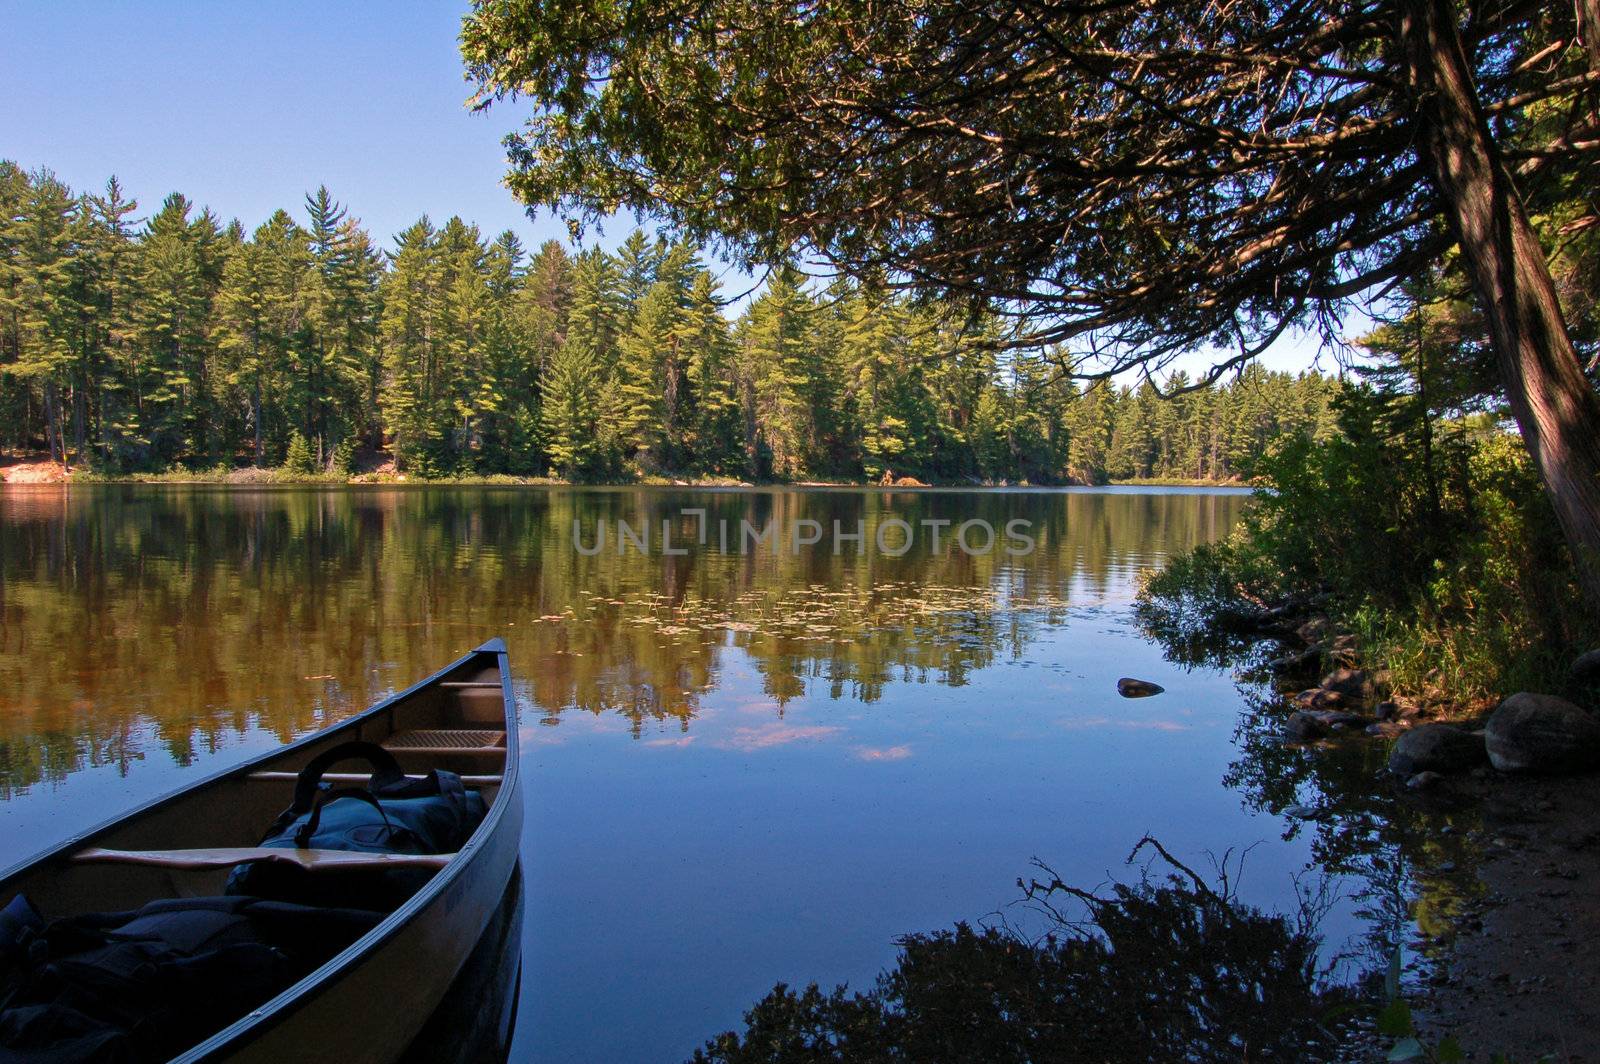 Lake and canoe after portage in sunny pine forest in Algonquin Park